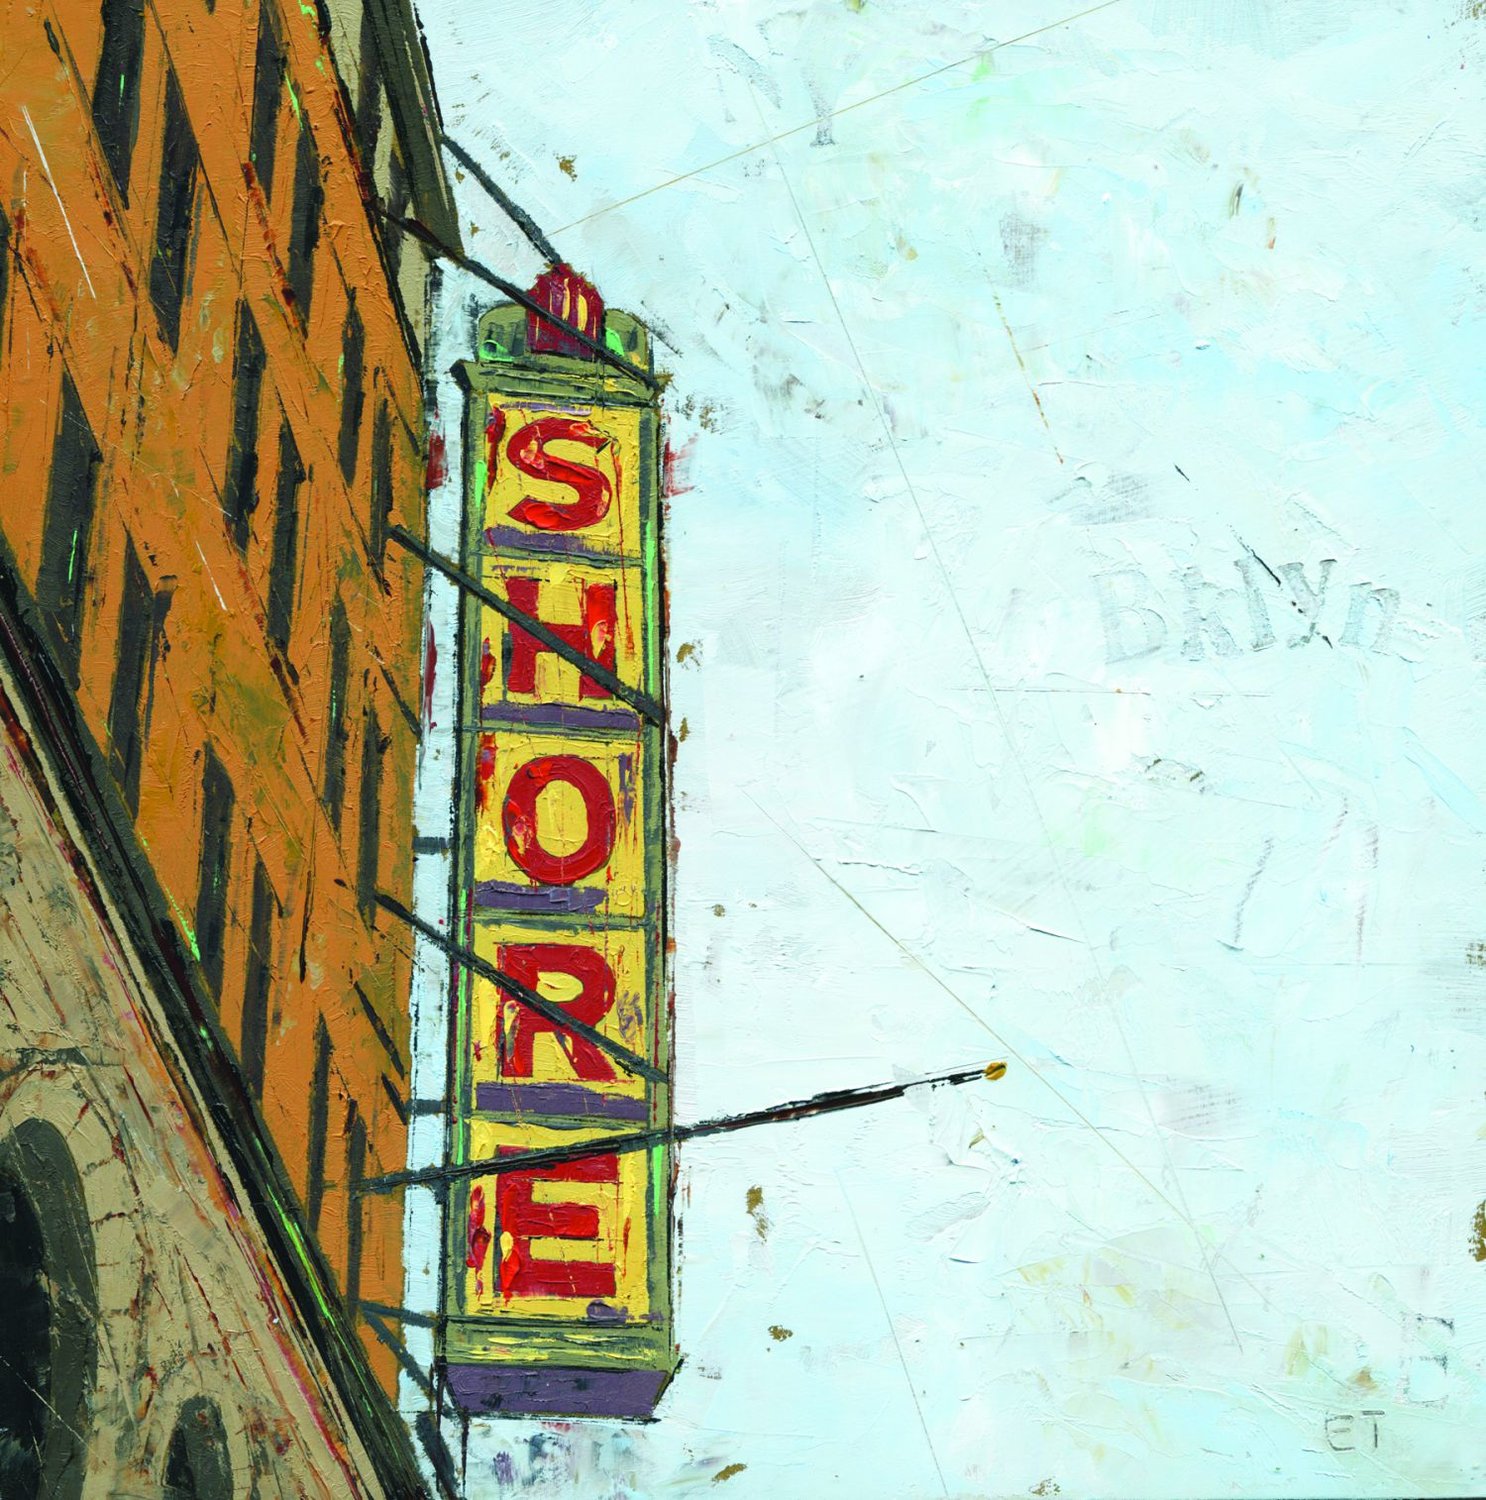 “Shore Hotel” is an oil on panel by Emily Thompson.